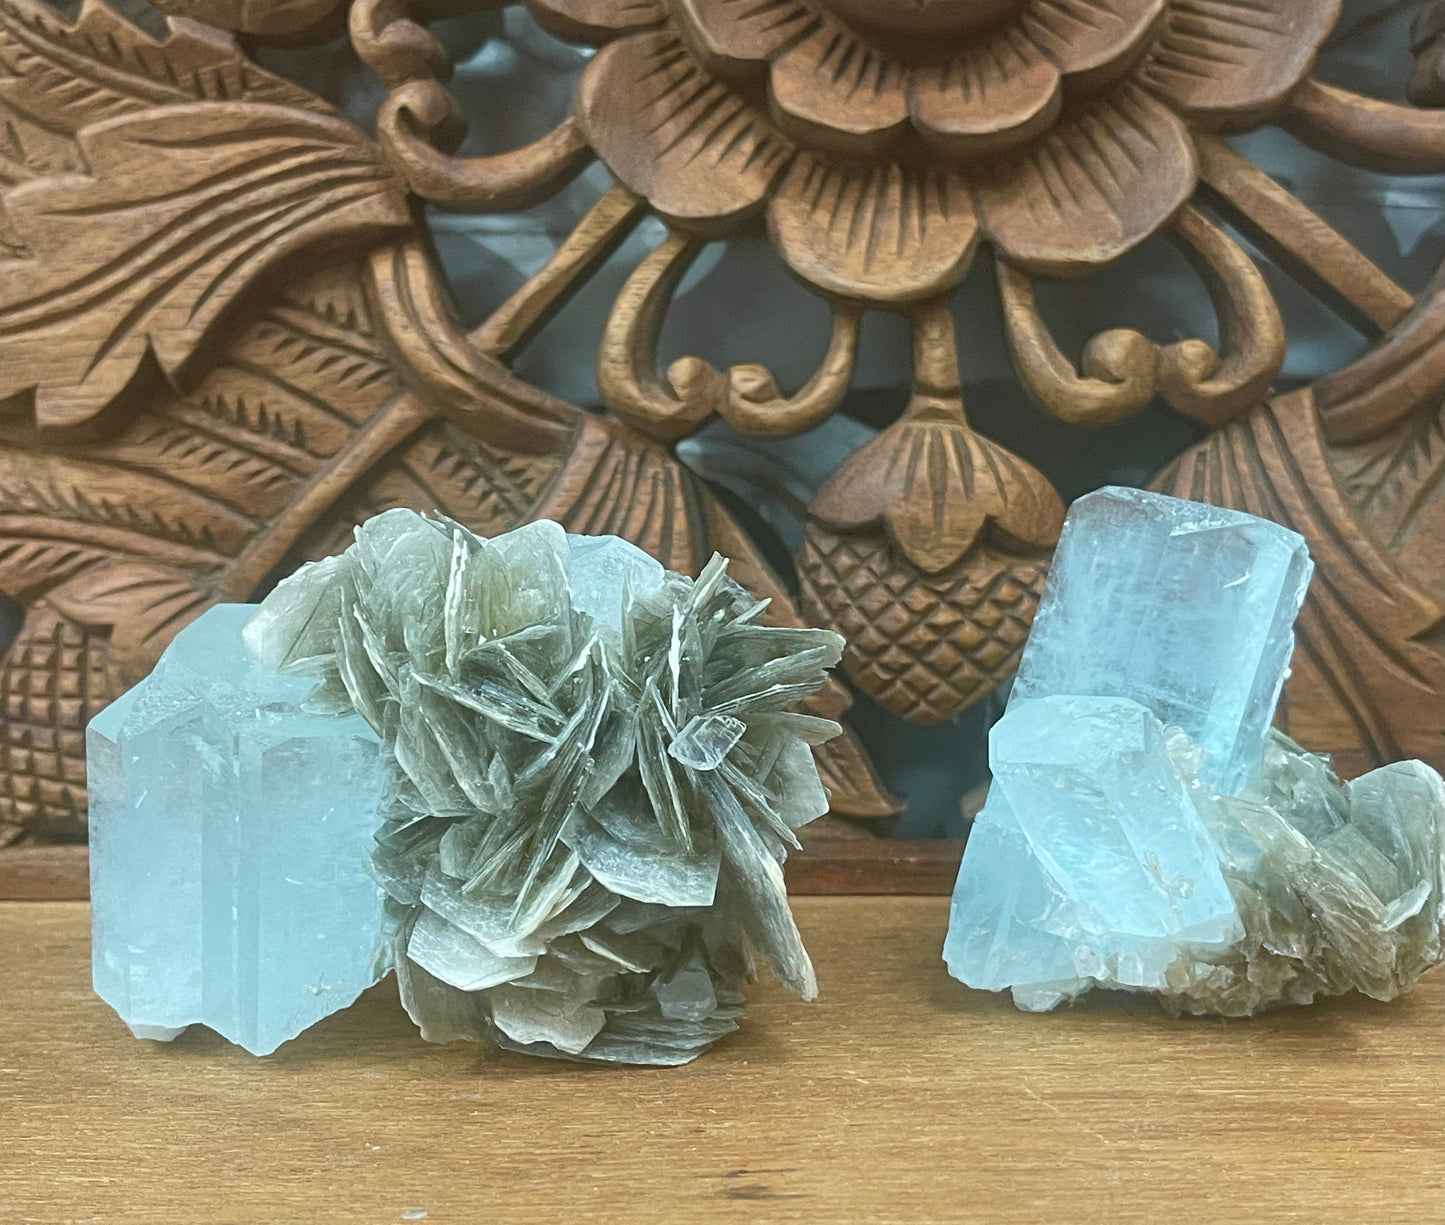 A++ Quality Aquamarine Specimens from Nagar Valley, Pakistan - 2 Available